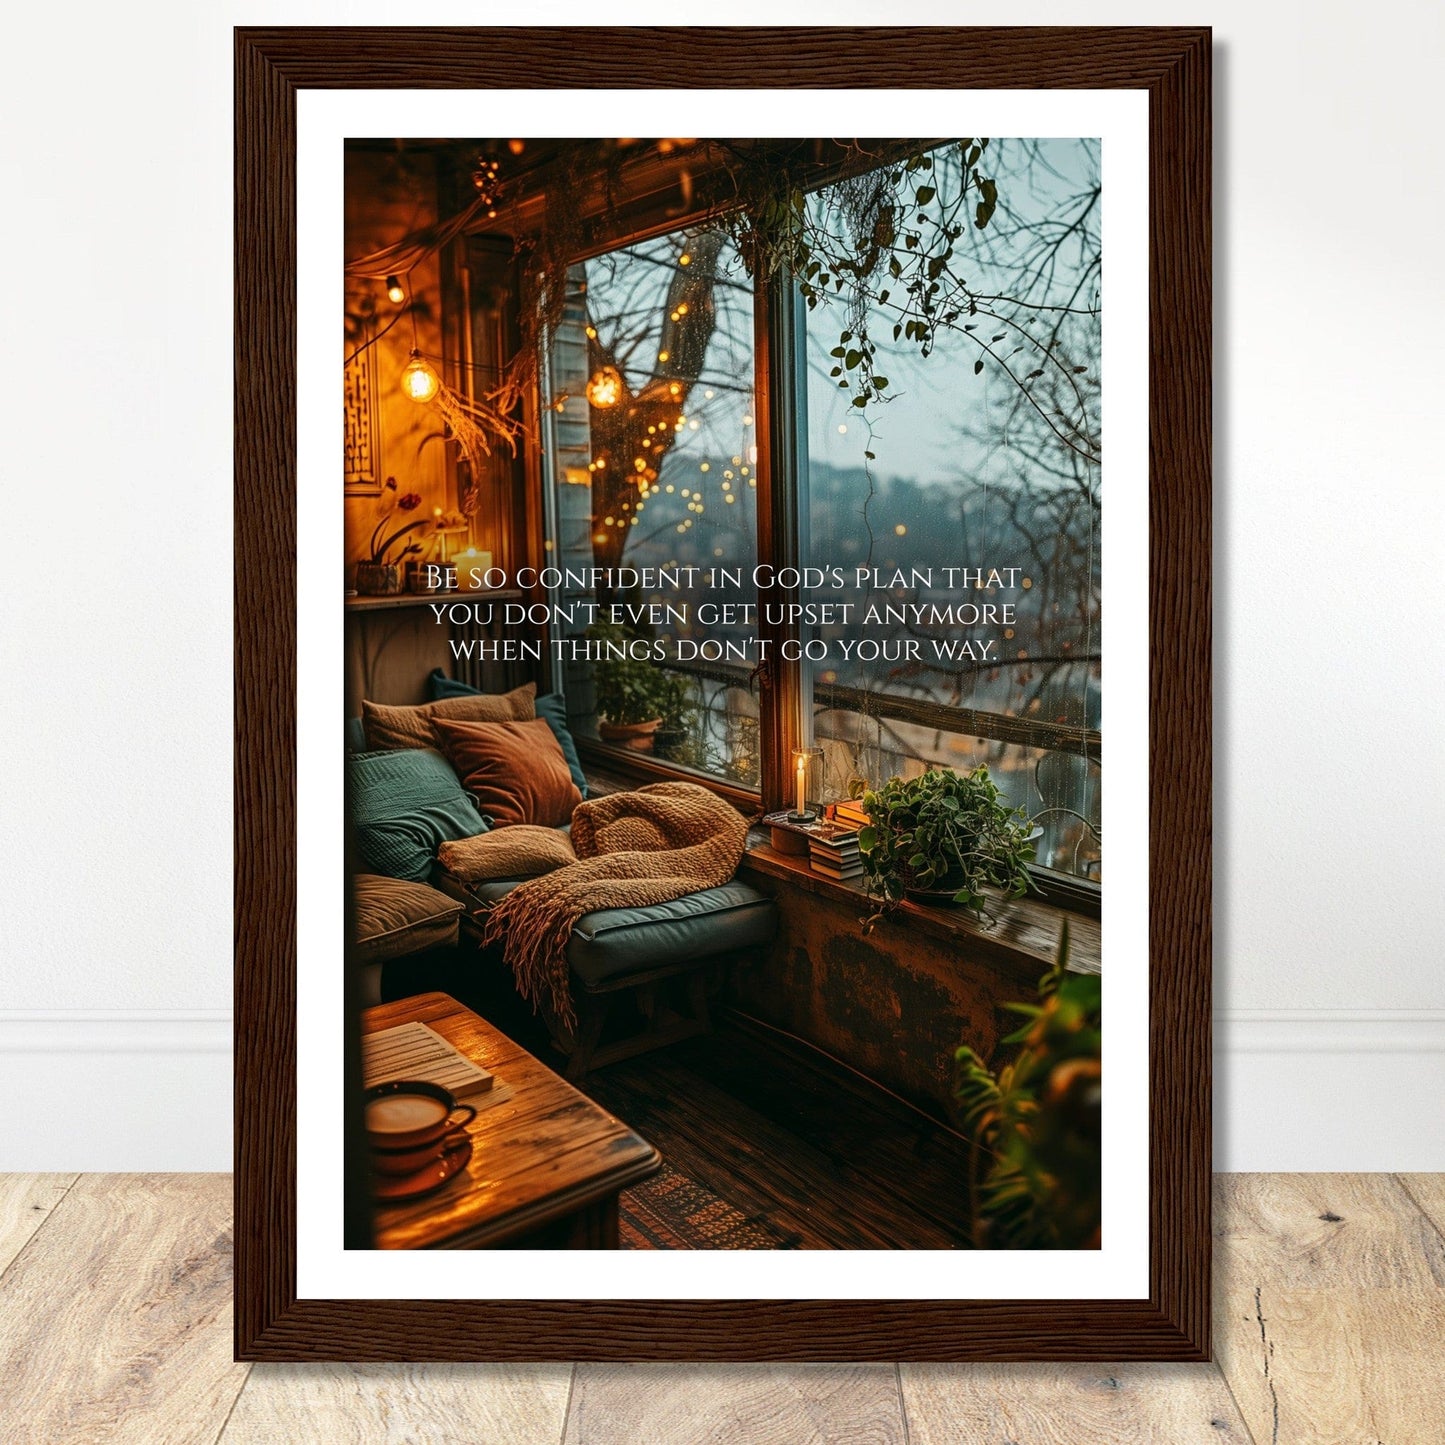 Coffee With My Father Print Material A4 21x29.7 cm / 8x12″ / Dark wood frame Premium Matte Paper Wooden Framed Poster